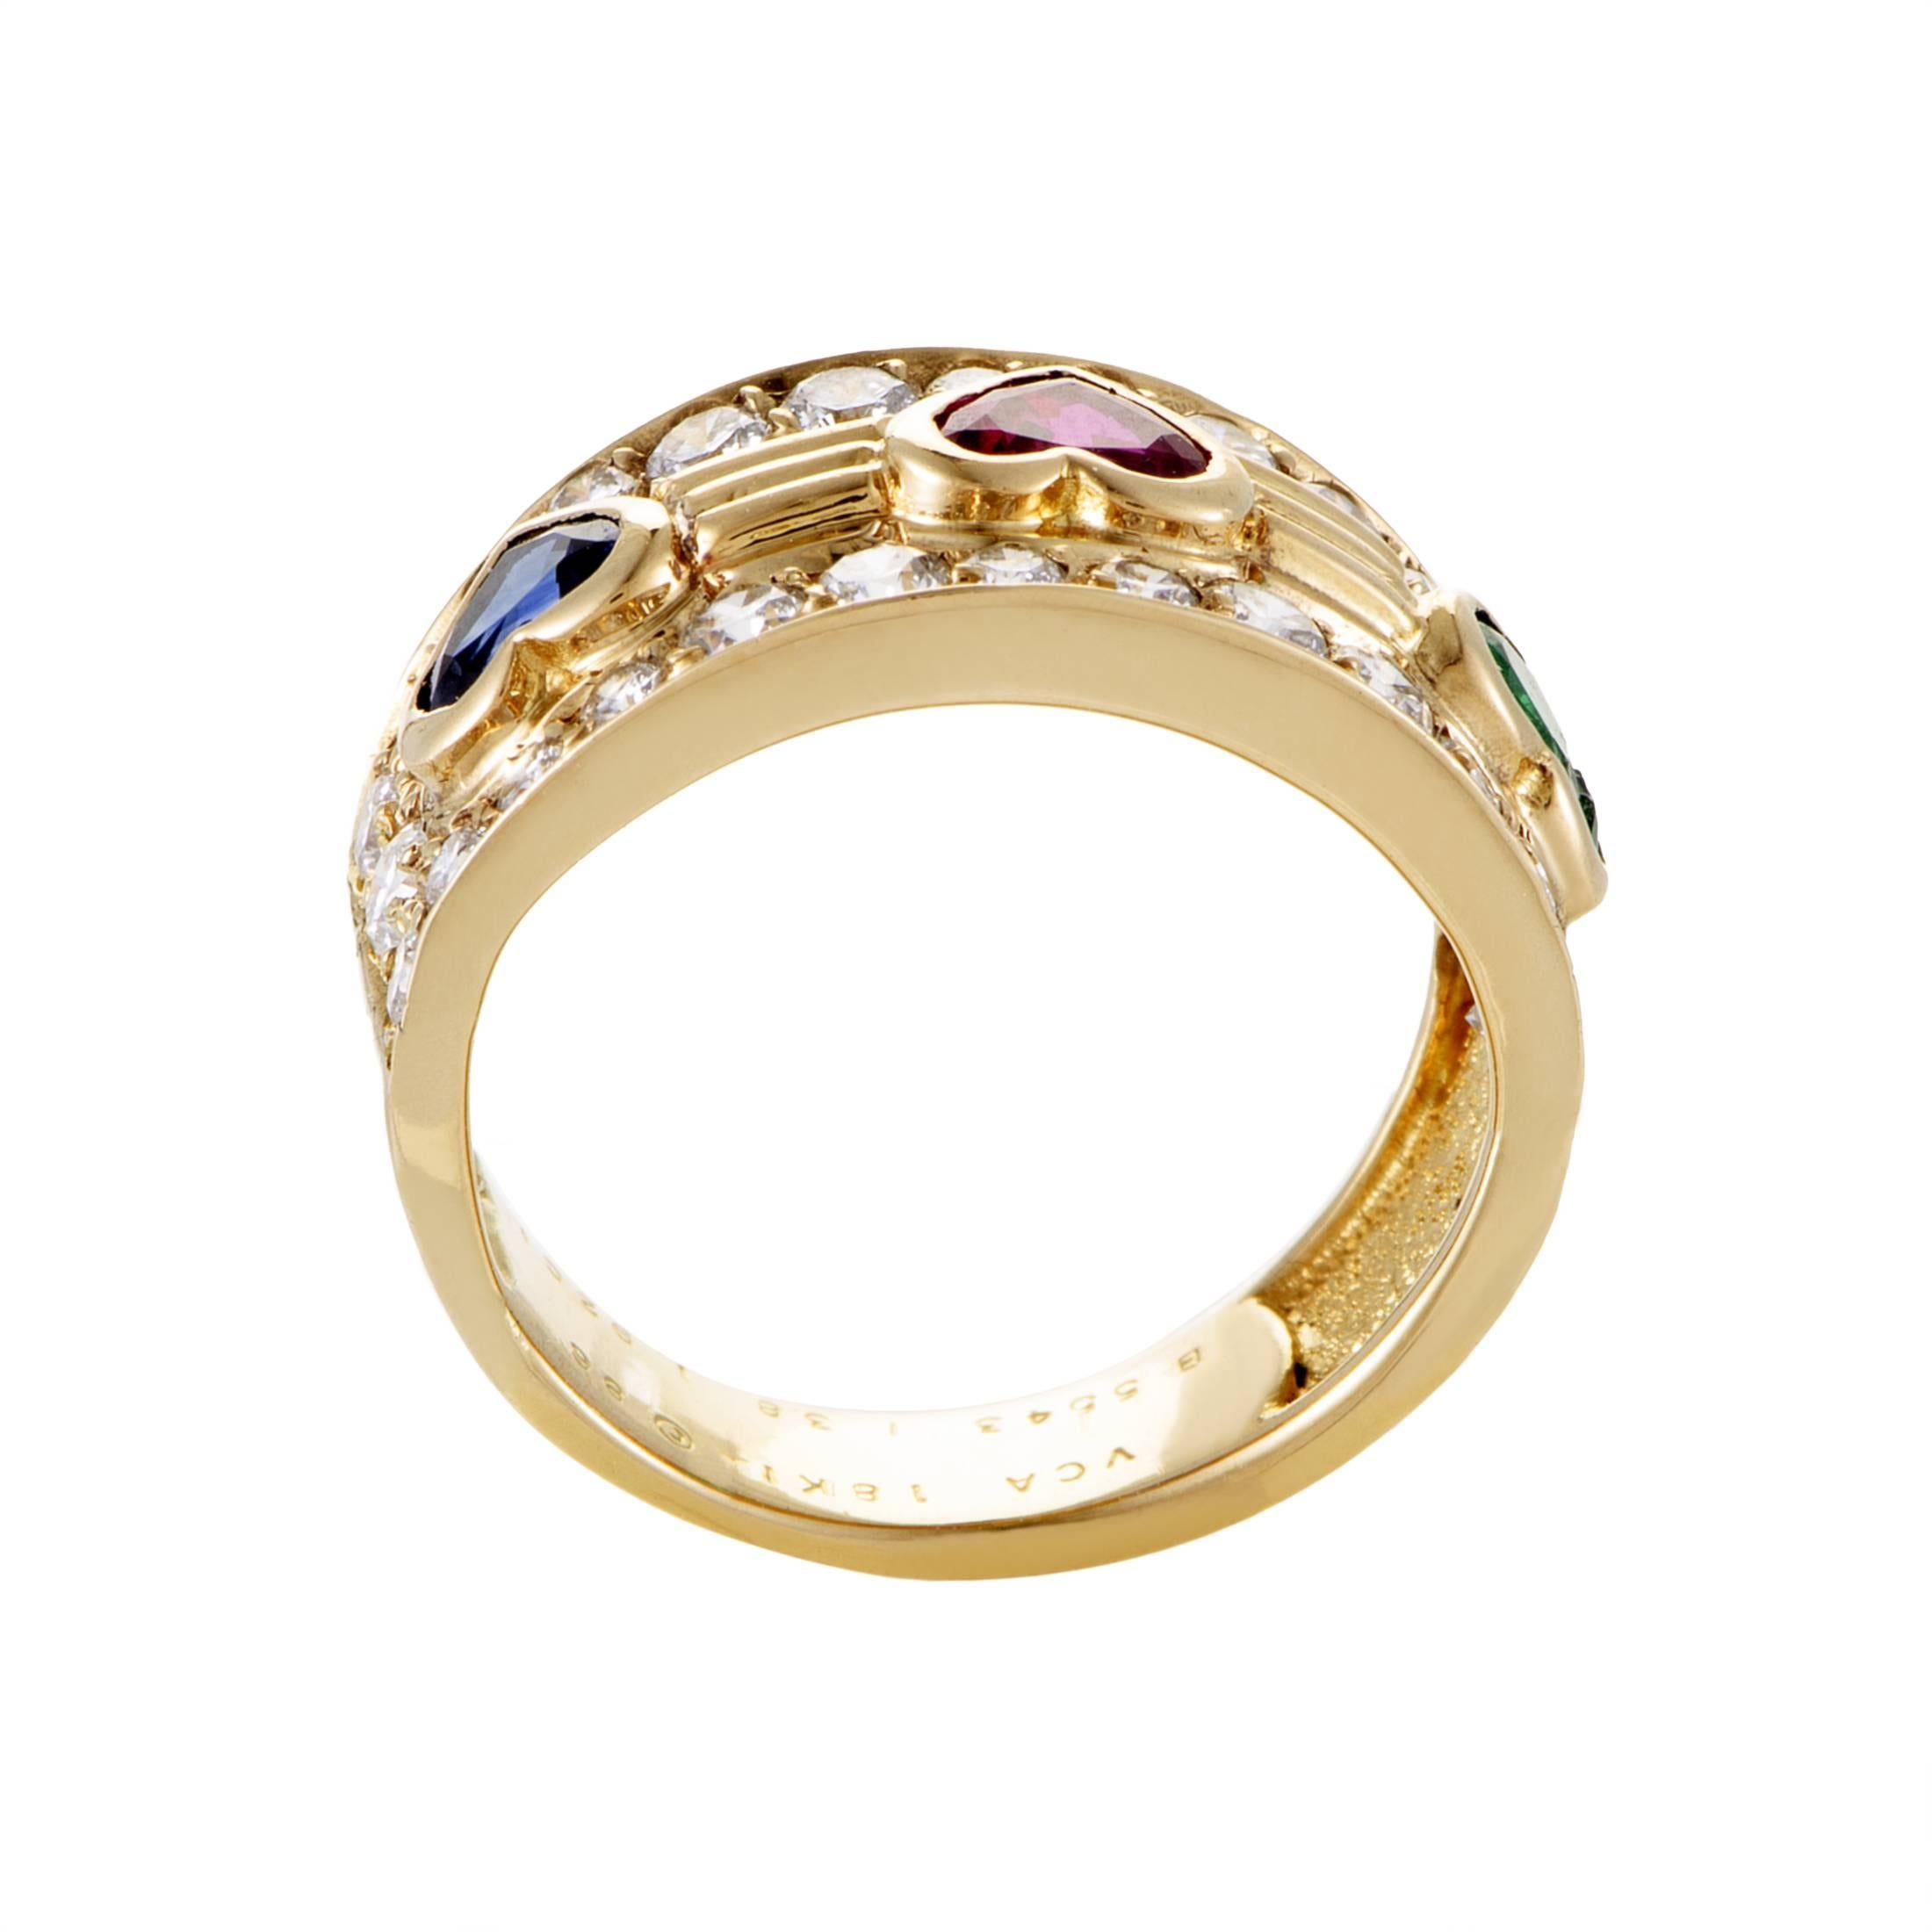 Employing marvelous precious stones for adorable heart-shaped decorations, Van Cleef & Arpels present this spellbinding ring made of 18K yellow gold and embellished with lustrous diamonds along with the lovely ruby, gorgeous emerald and stunning